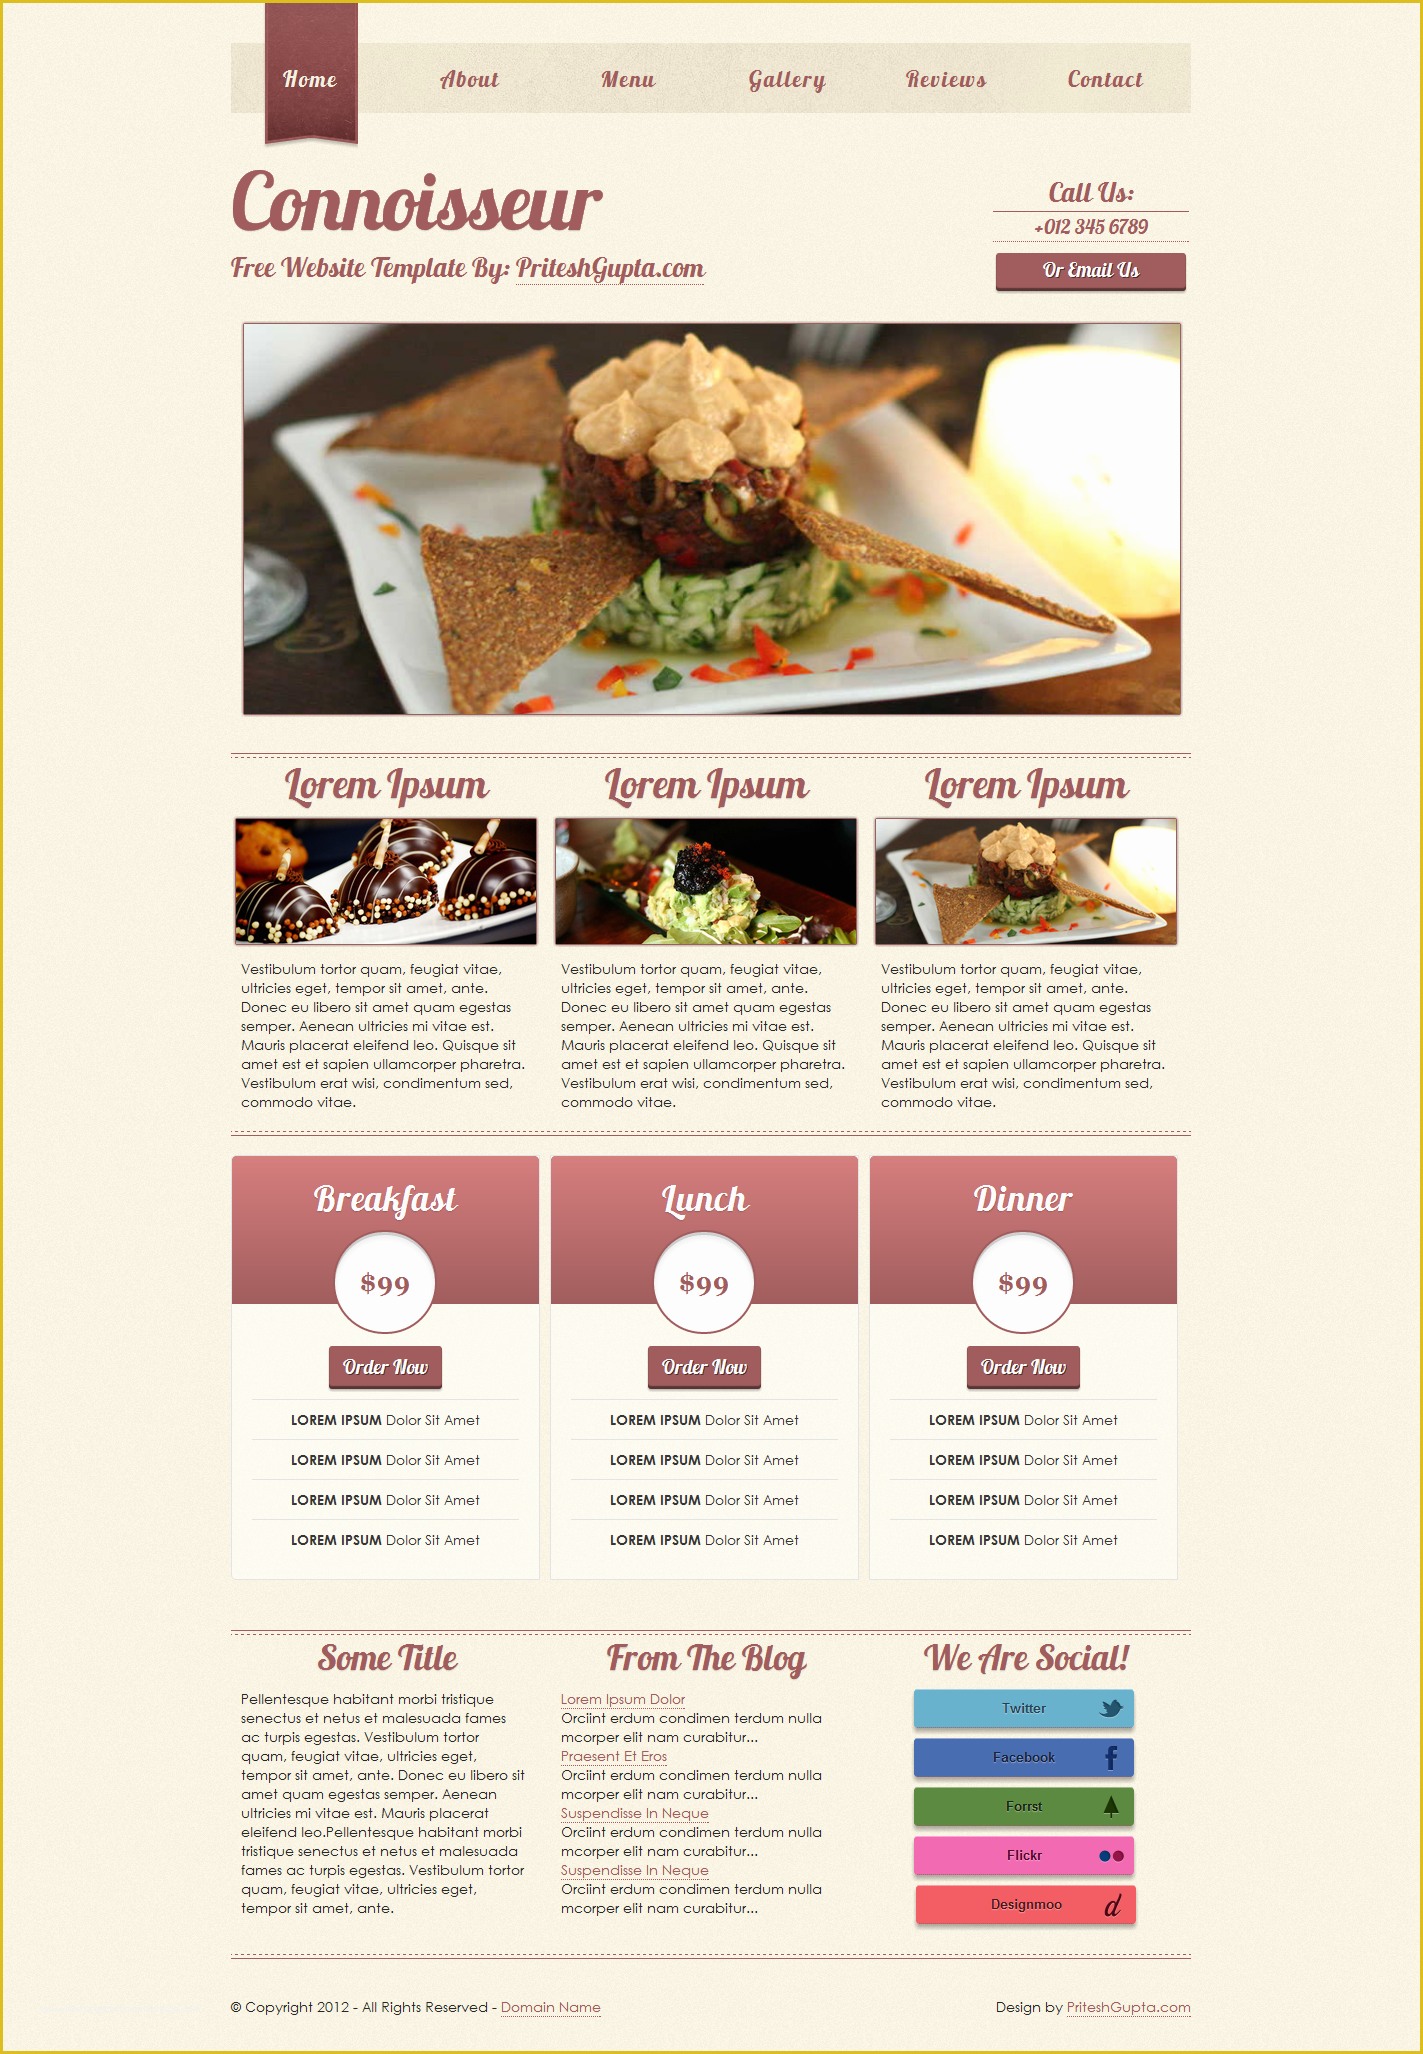 Catering Website Templates Free Of Connoisseur Free Restaurant Website Template